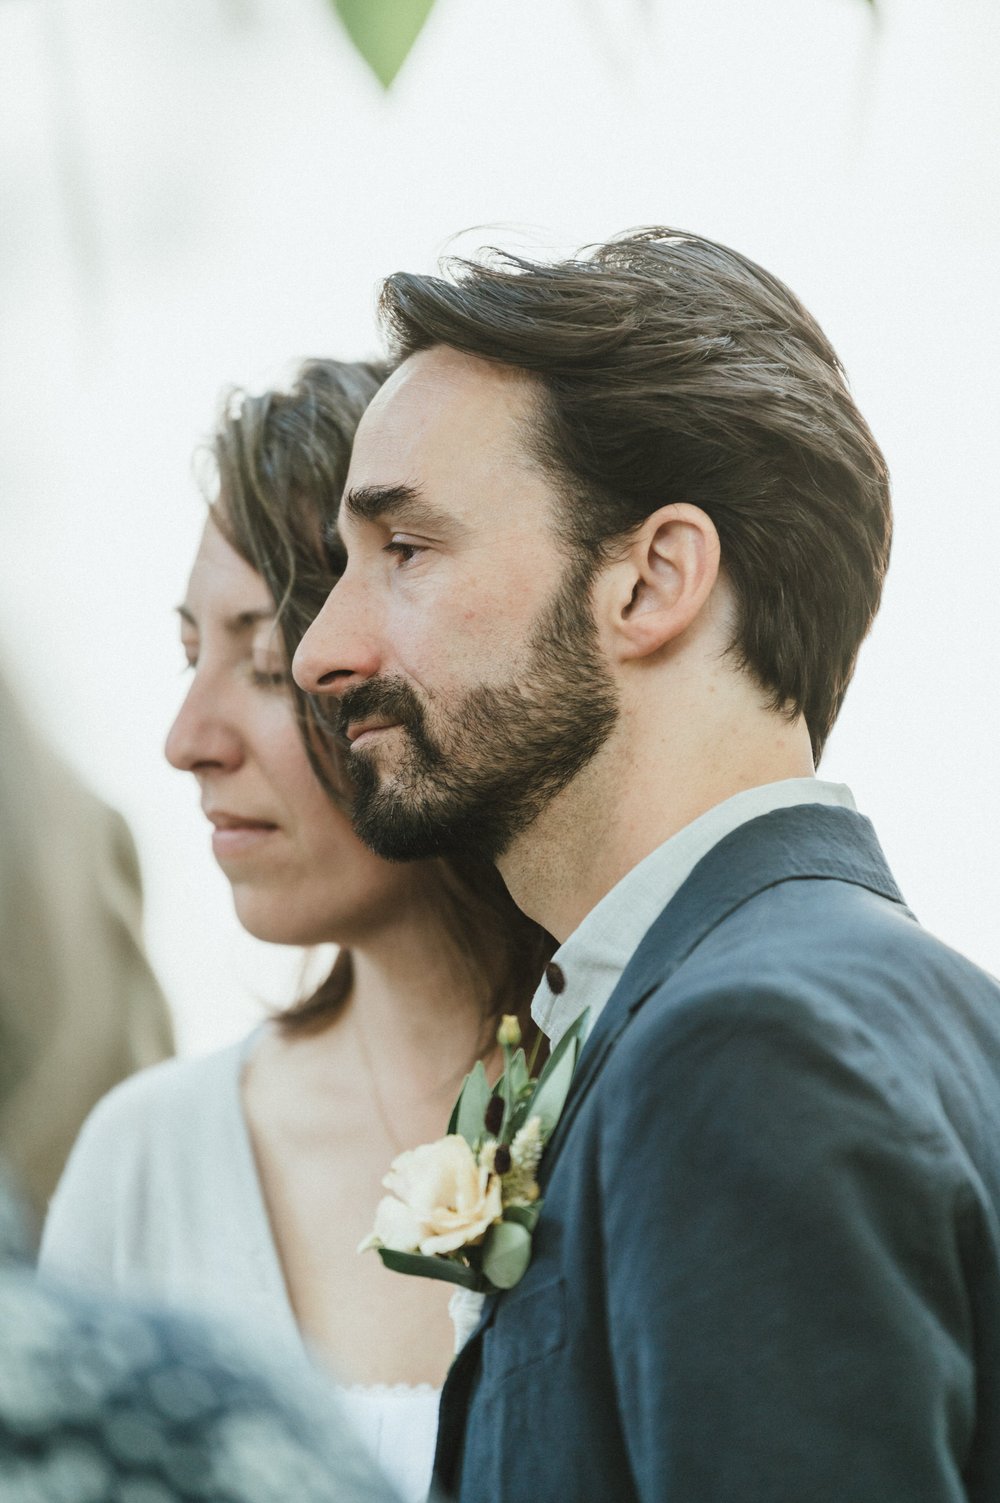 emotive photo of bride and groom profiles close up together